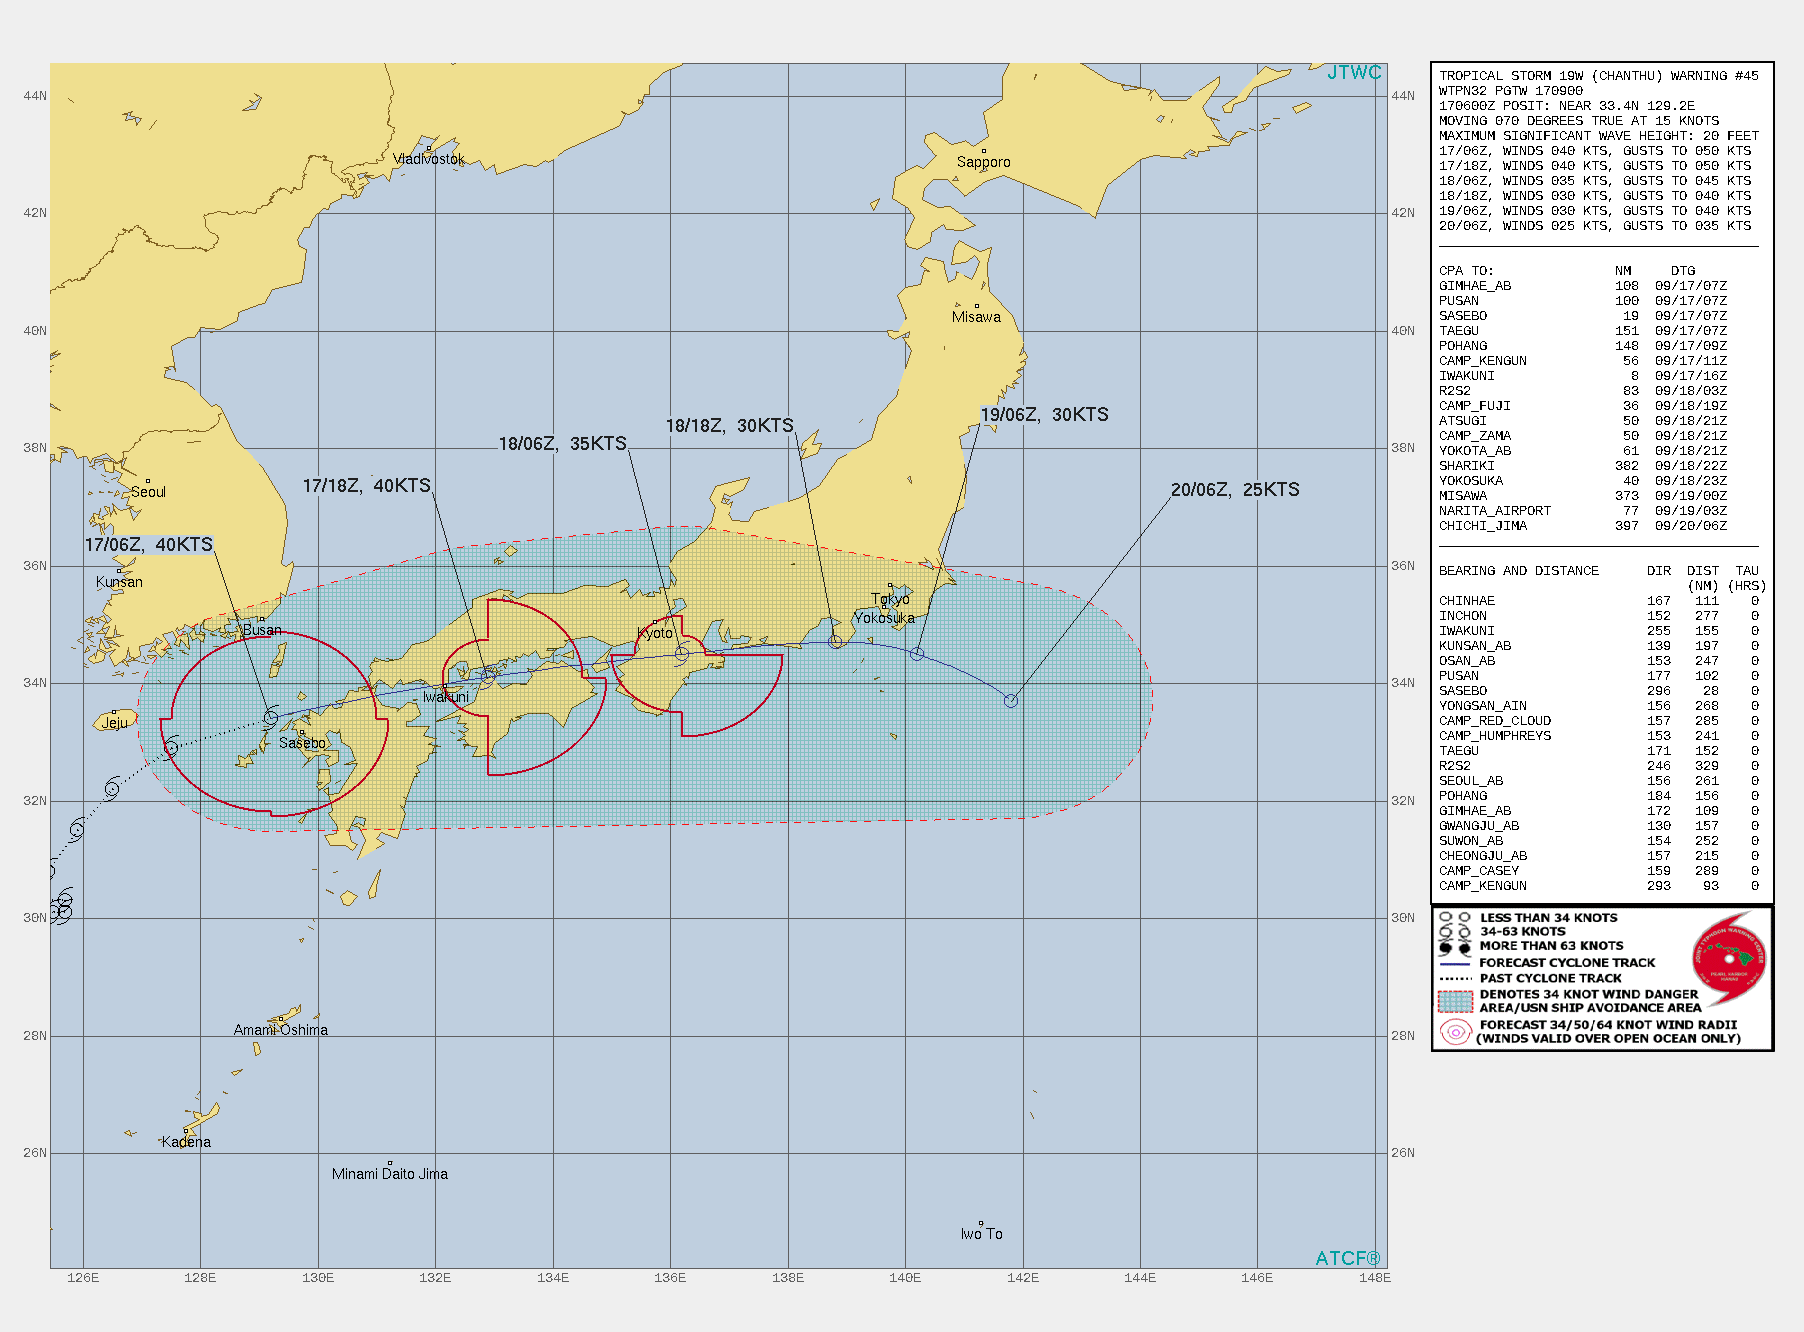 TS 19W(CHANTHU). WARNING 45 ISSUED AT 17/09UTC.SIGNIFICANT FORECAST CHANGES: THERE ARE NO SIGNIFICANT CHANGES TO THE FORECAST FROM THE PREVIOUS WARNING.  FORECAST DISCUSSION: TS 19W HAS ROUNDED THE RIDGE AXIS AND IS NOW ACCELERATING TOWARDS THE EAST-NORTHEAST. THE SYSTEM HAS SKIRTED THE NORTHWESTERN TIP OF KYUSHU AND IS RAPIDLY MOVING TOWARDS A LANDFALL IN THE VICINITY OF FUKUOKA IN THE NEXT COUPLE OF HOURS. IT IS FORECAST TO CONTINUE MOVING GENERALLY EASTWARD, THROUGH THE INLAND SEA AND EMERGE BACK OVER THE PACIFIC JUST AFTER 24H. AS THE SYSTEM MOVES THROUGH THE INLAND SEA, INTERACTION WITH THE COMPLEX AND RUGGED TERRAIN WILL, IN CONJUNCTION WITH STEADILY INCREASING WESTERLY SHEAR, LEAD TO STEADY WEAKENING THROUGH THE FORECAST PERIOD. ANALYSIS OF 500MB DATA INDICATES A SMALL SHORT-WAVE TROUGH JUST WEST OF THE SYSTEM, WHICH IS EXPECTED TO MOVE IN PHASE WITH TS 19W OVER THE NEXT 24 HOURS, FACILITATING THE START OF EXTRA-TROPICAL TRANSITION (ETT). HOWEVER, BY 36H THIS SHORTWAVE TROUGH WILL OUTPACE TS 19W, PUTTING IT UNDER CONVERGENT FLOW ALOFT LEADING TO FURTHER WEAKENING AFTER 48H AS THE SYSTEM MOVES BACK OVER WATER. GLOBAL MODELS CONTINUE TO SHOW THE DEVELOPMENT OF A SECONDARY LOW PRESSURE AREA, A POSSIBLE TRIPLE POINT LOW, TO THE WEST OF HONSHU, WHICH THEN MOVES NORTHEAST IN PHASE WITH THE SHORTWAVE TROUGH MENTIONED EARLIER. THIS LOW THEN BECOMES THE DOMINATE EXTRA-TROPICAL SYSTEM, DEVELOPING STRONG FRONTAL FEATURES WHICH WILL EXTEND SOUTHWESTWARD TO THE VICINITY OF TS 19W, WHICH WILL MERGE WITH THE FRONT BOUNDARY SOUTH OF TOKYO. STRONG RIDGING BUILDING INTO FROM THE NORTHWEST BEHIND THE PRIMARY LOW WILL BLOCK FURTHER NORTHEAST MOVEMENT OF TS 19W AND THE SYSTEM IS EXPECTED TO SLOW AND TURN SOUTH TO THE SOUTHEAST OF TOKYO AFTER 48H, ALONG THE TAIL END OF THE DECAYING FRONTAL BOUNDARY. TS 19W WILL COMPLETE ETT BY 36H AND WILL REMAIN A WEAK EXTRA-TROPICAL LOW THROUGH  72H, WHILE SLOWLY DISSIPATING.